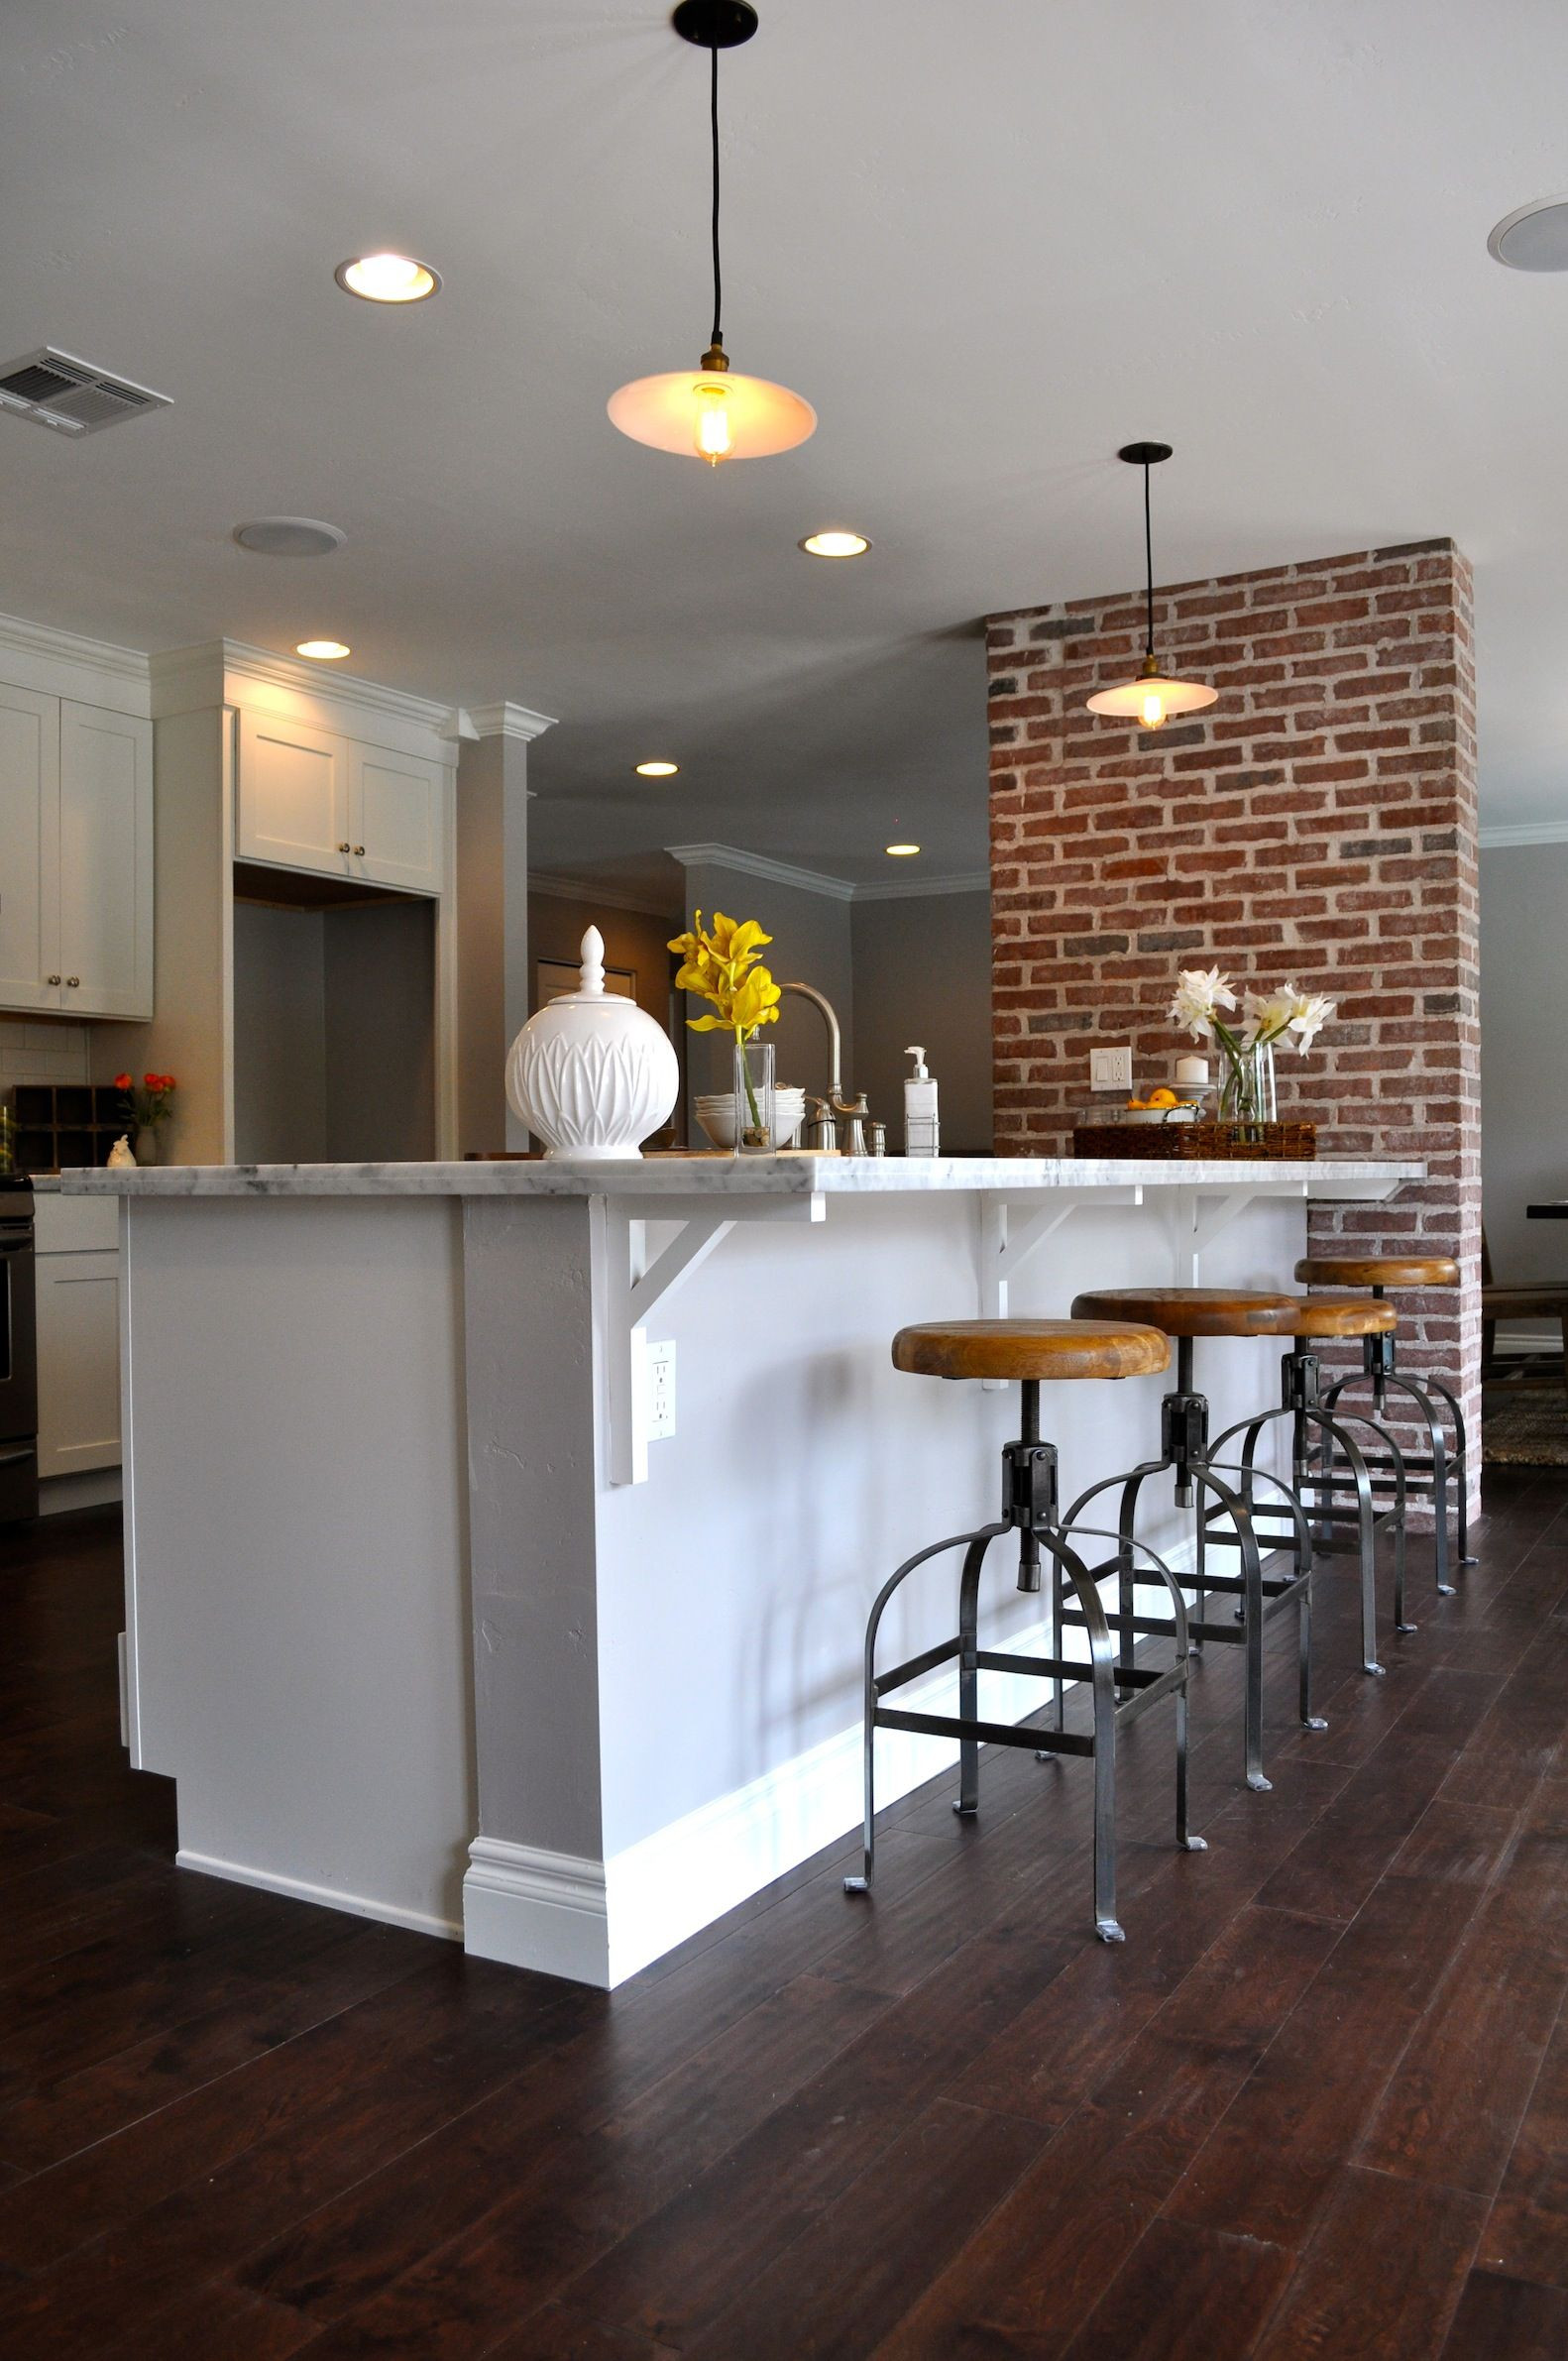 Kitchen Island Attached To Wall
 Custom brick peninsula wall by Rafterhouse in 2019